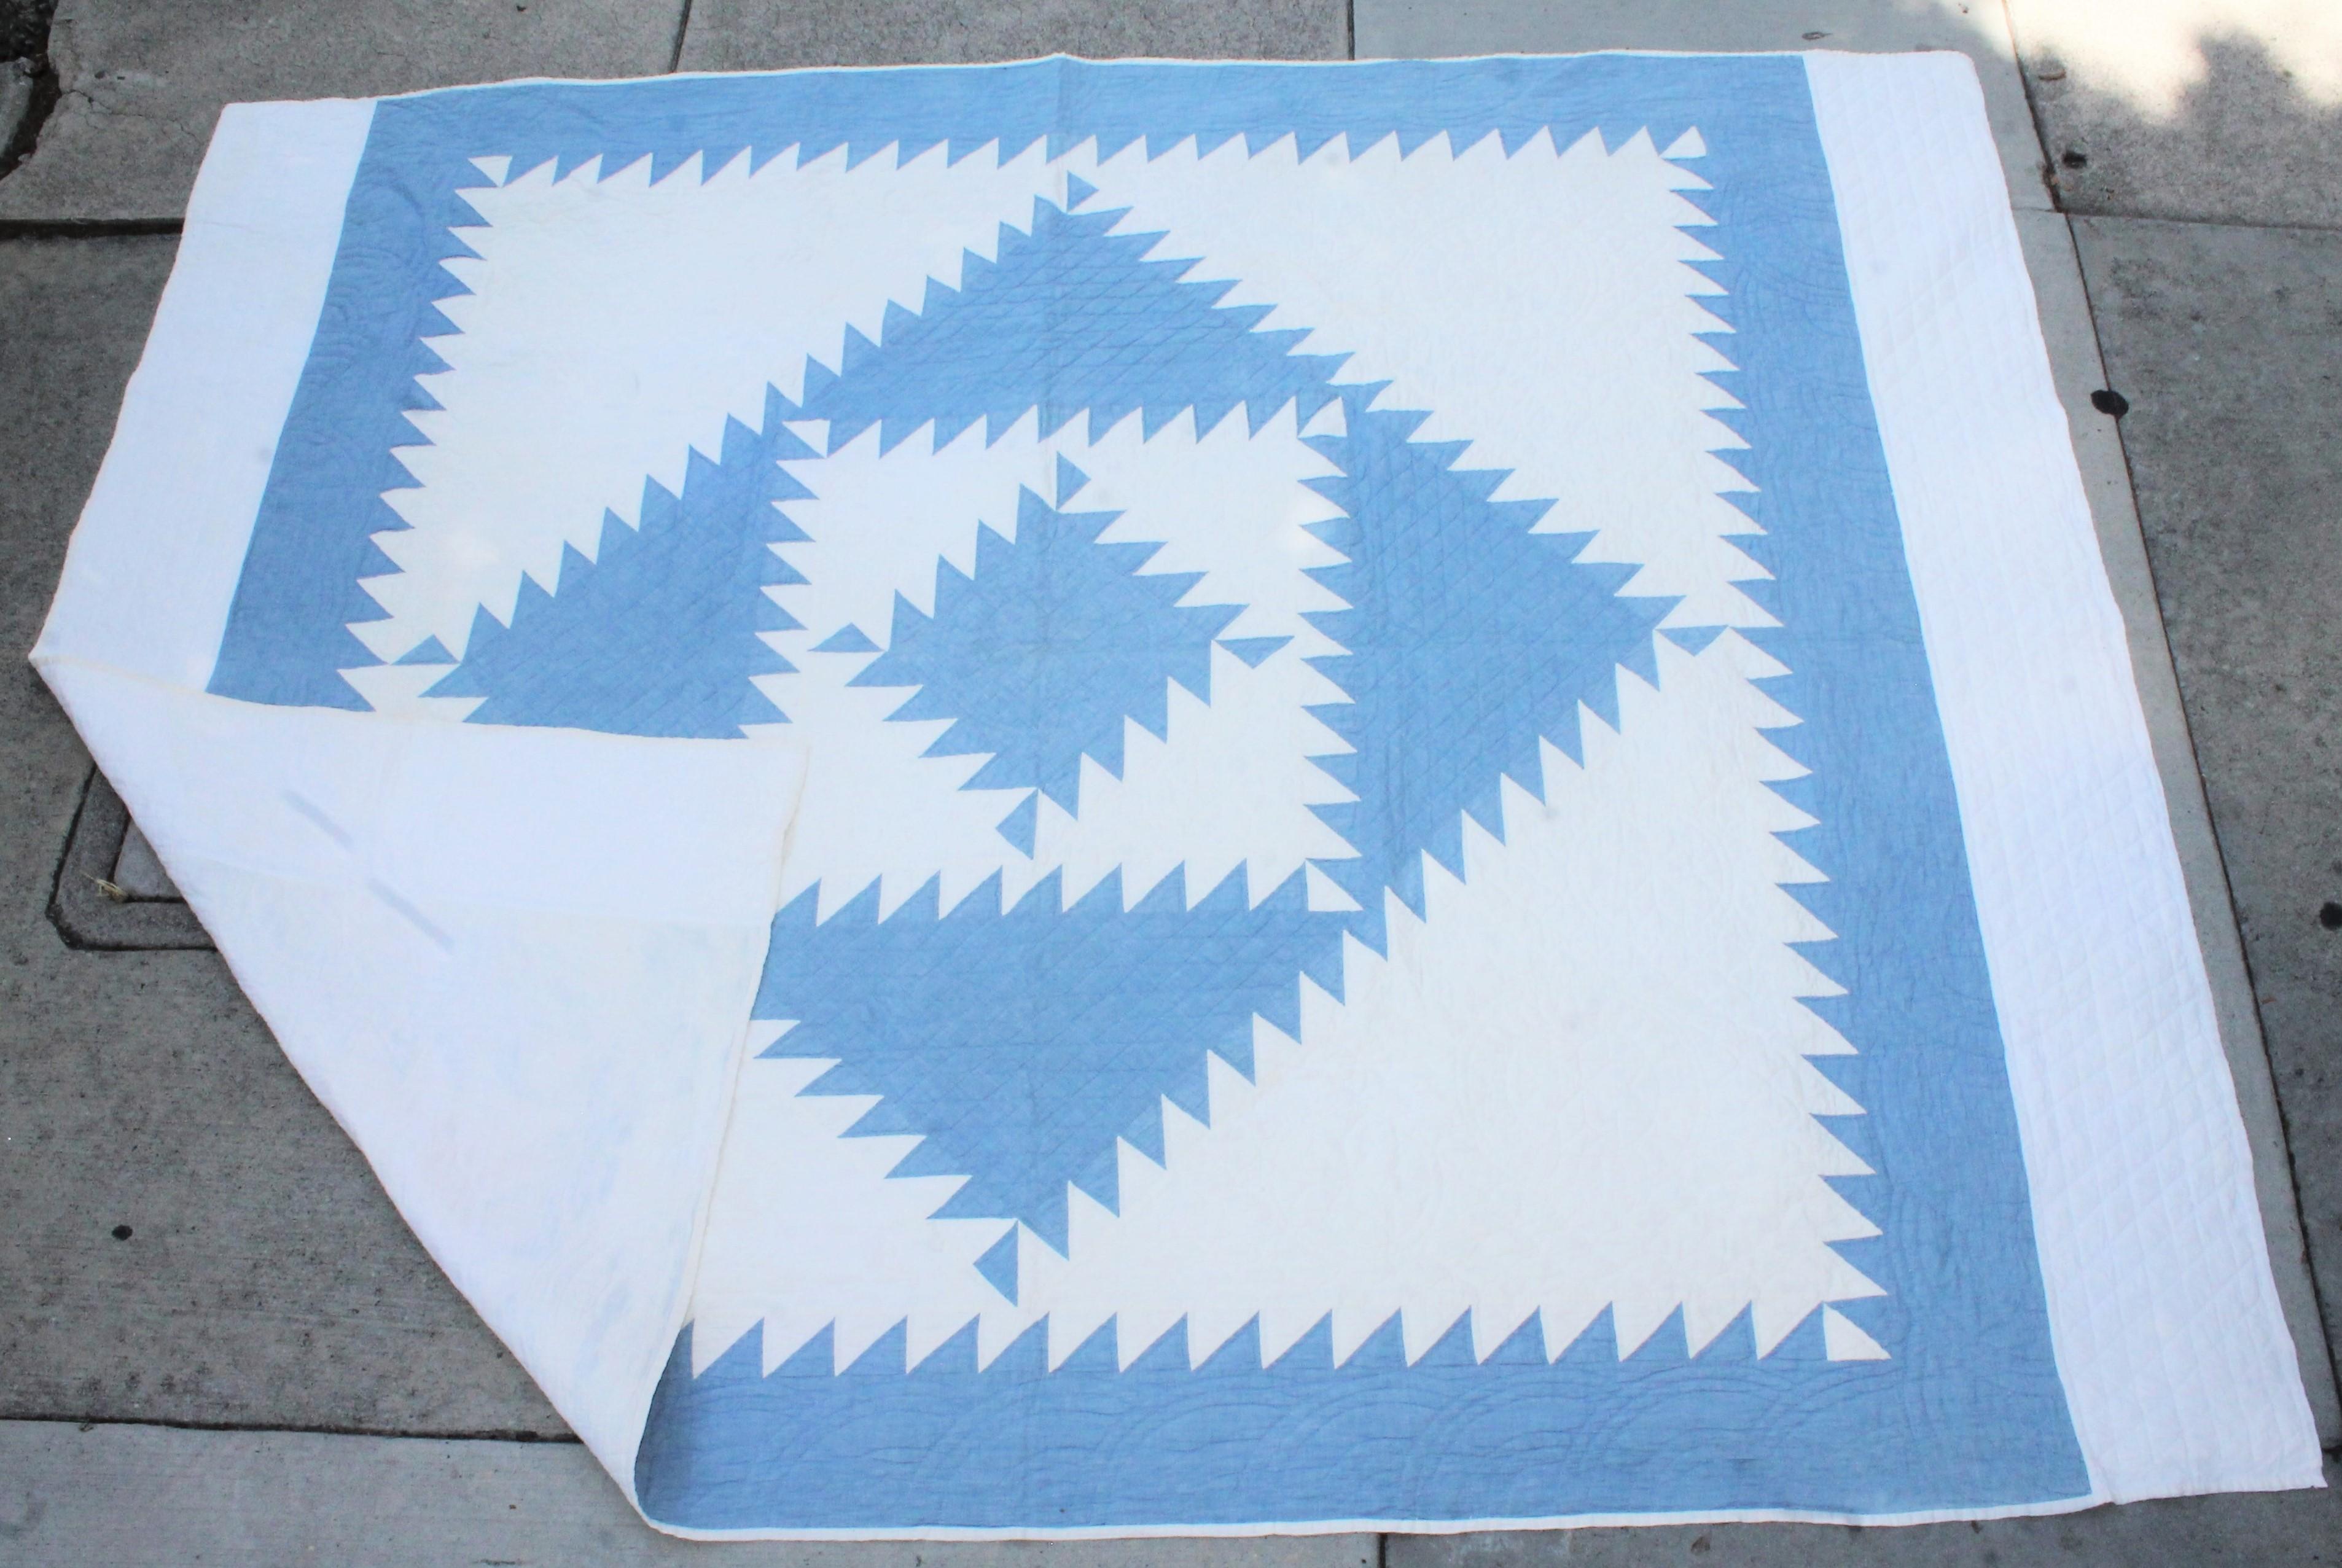 This masterpiece quilt has amazing quilting and piece work. It is a shambrea blue fabric on a white ground. Fantastic workmanship. This was found and probably made in Lancaster County, Pennsylvania.